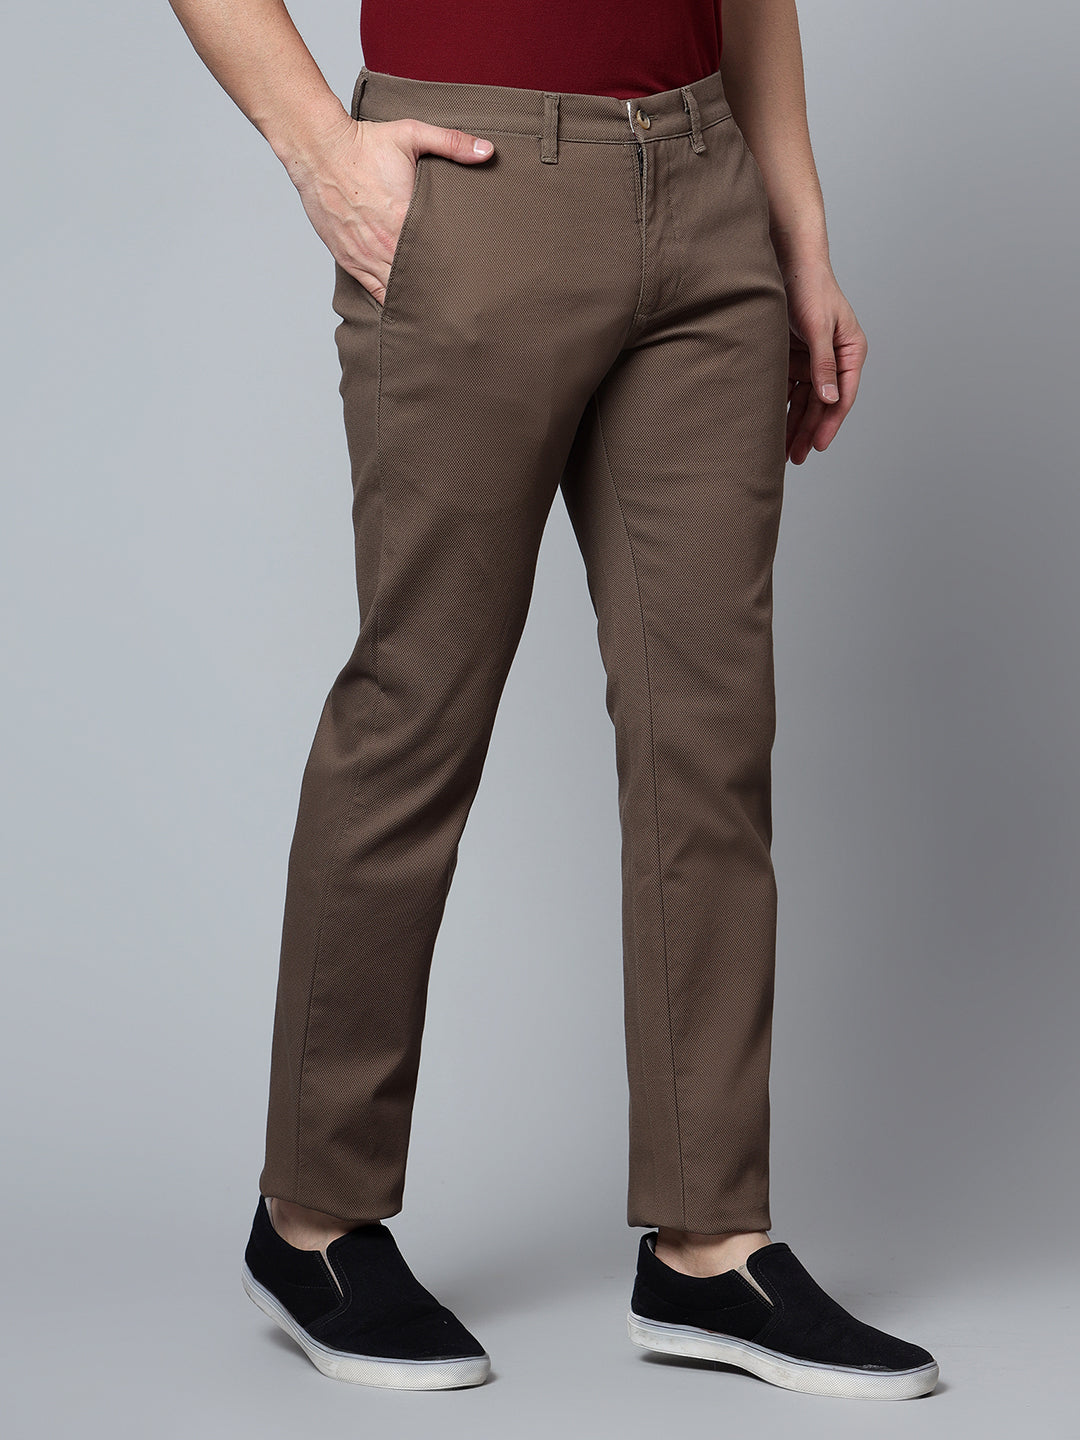 Vintage High Waisted Mens Formal Trousers Sale With Pockets Slim Fit Office  Trousers For Formal Business Style From Cozycomfy21, $44.22 | DHgate.Com